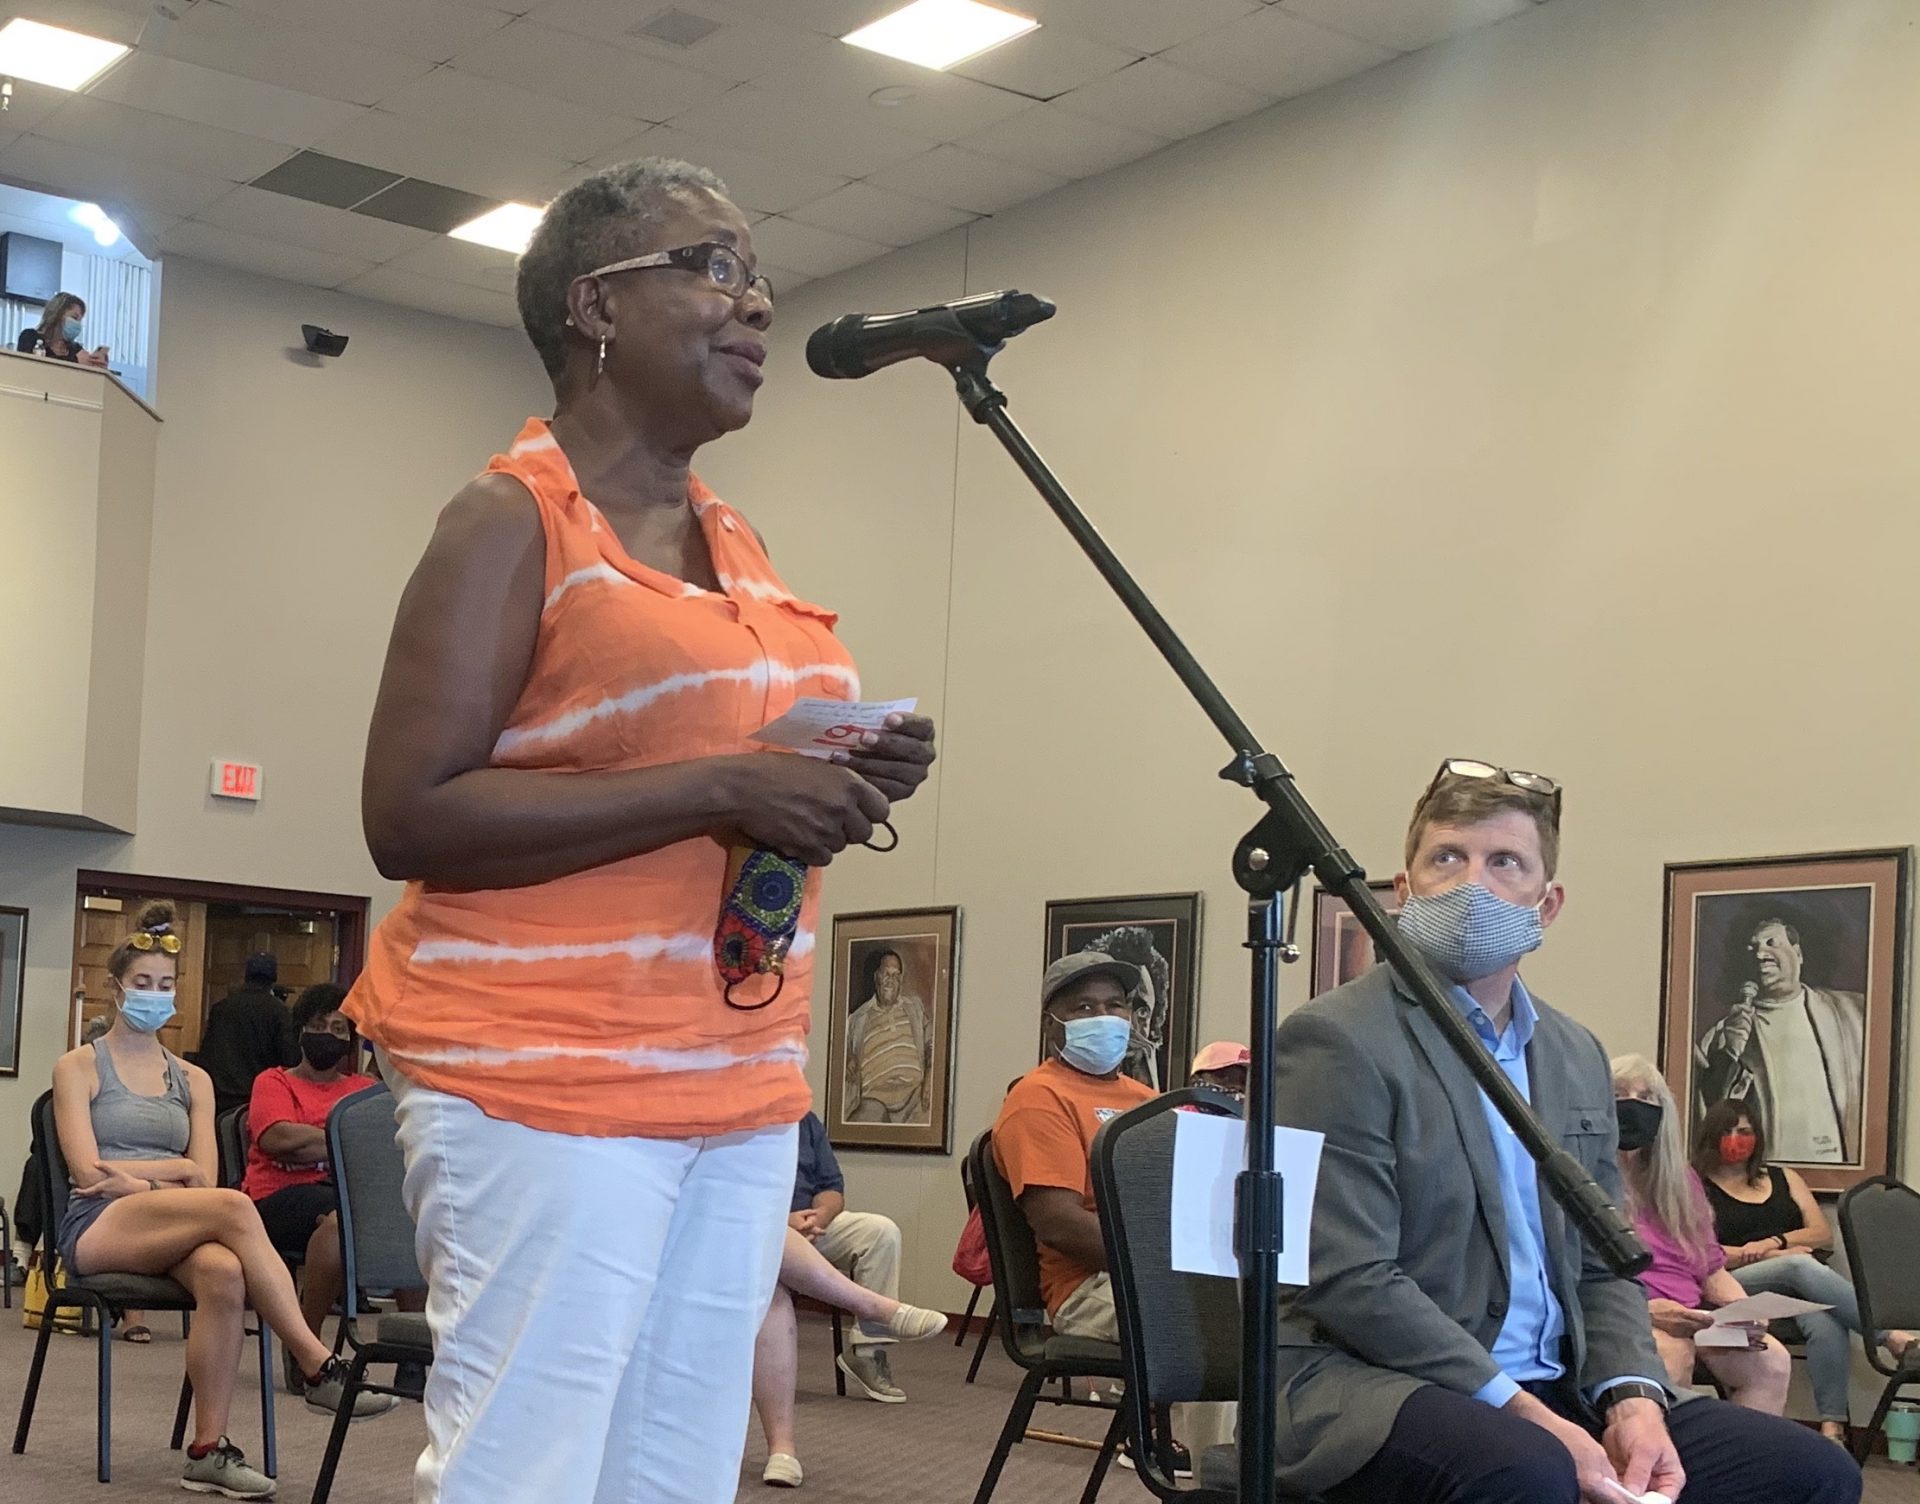 Wanda Taylor of Kansas City, speaking a public meeting in favor of changing the name of the fountain honoring J.C. Nichols, a Kansas City developer who barred Blacks and Jews from his neighborhoods.